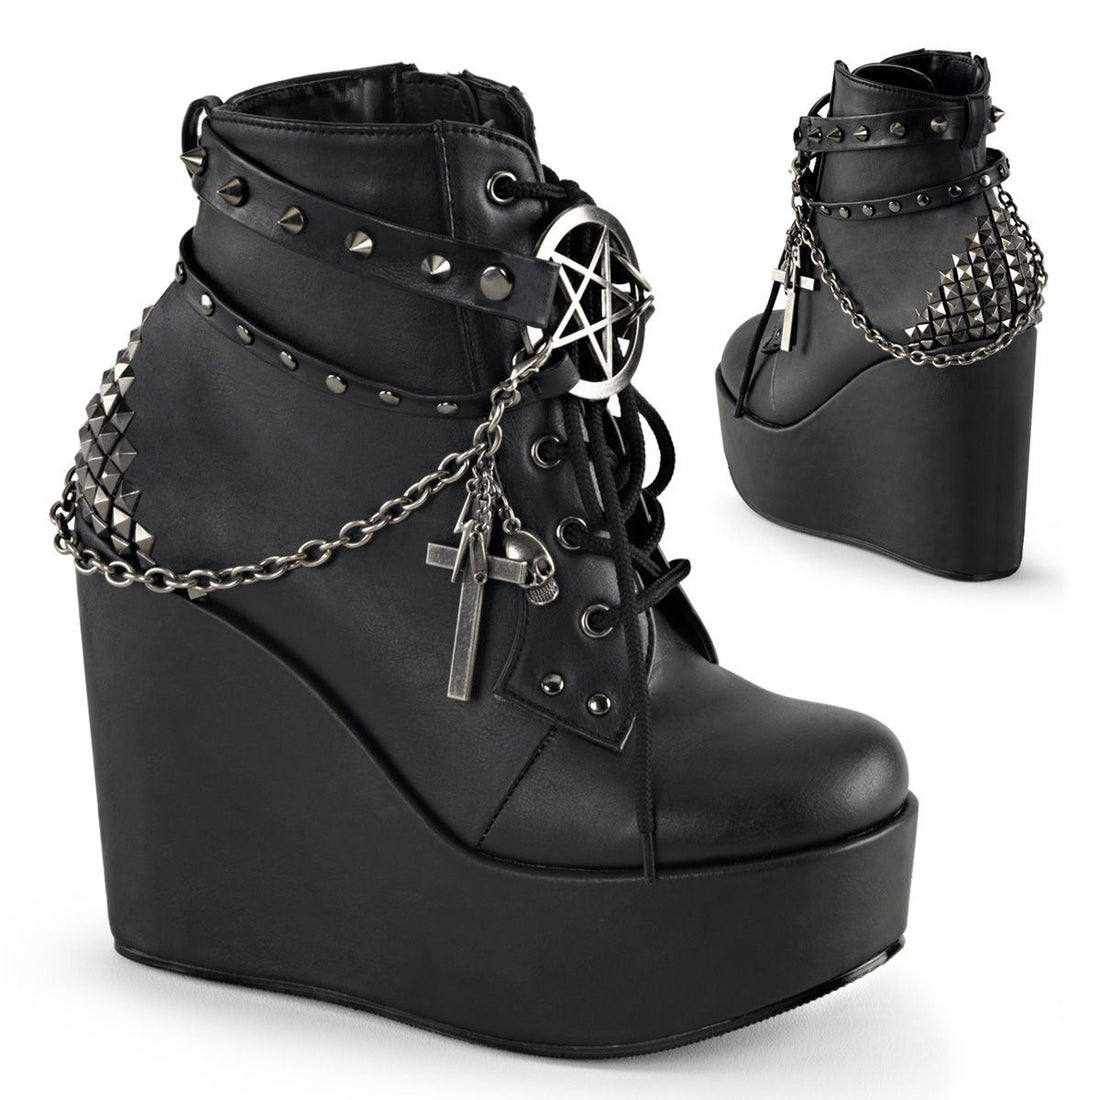 Demonia Poison 101 Black Vegan Leather Ankle Boots - Upperclass Fashions 